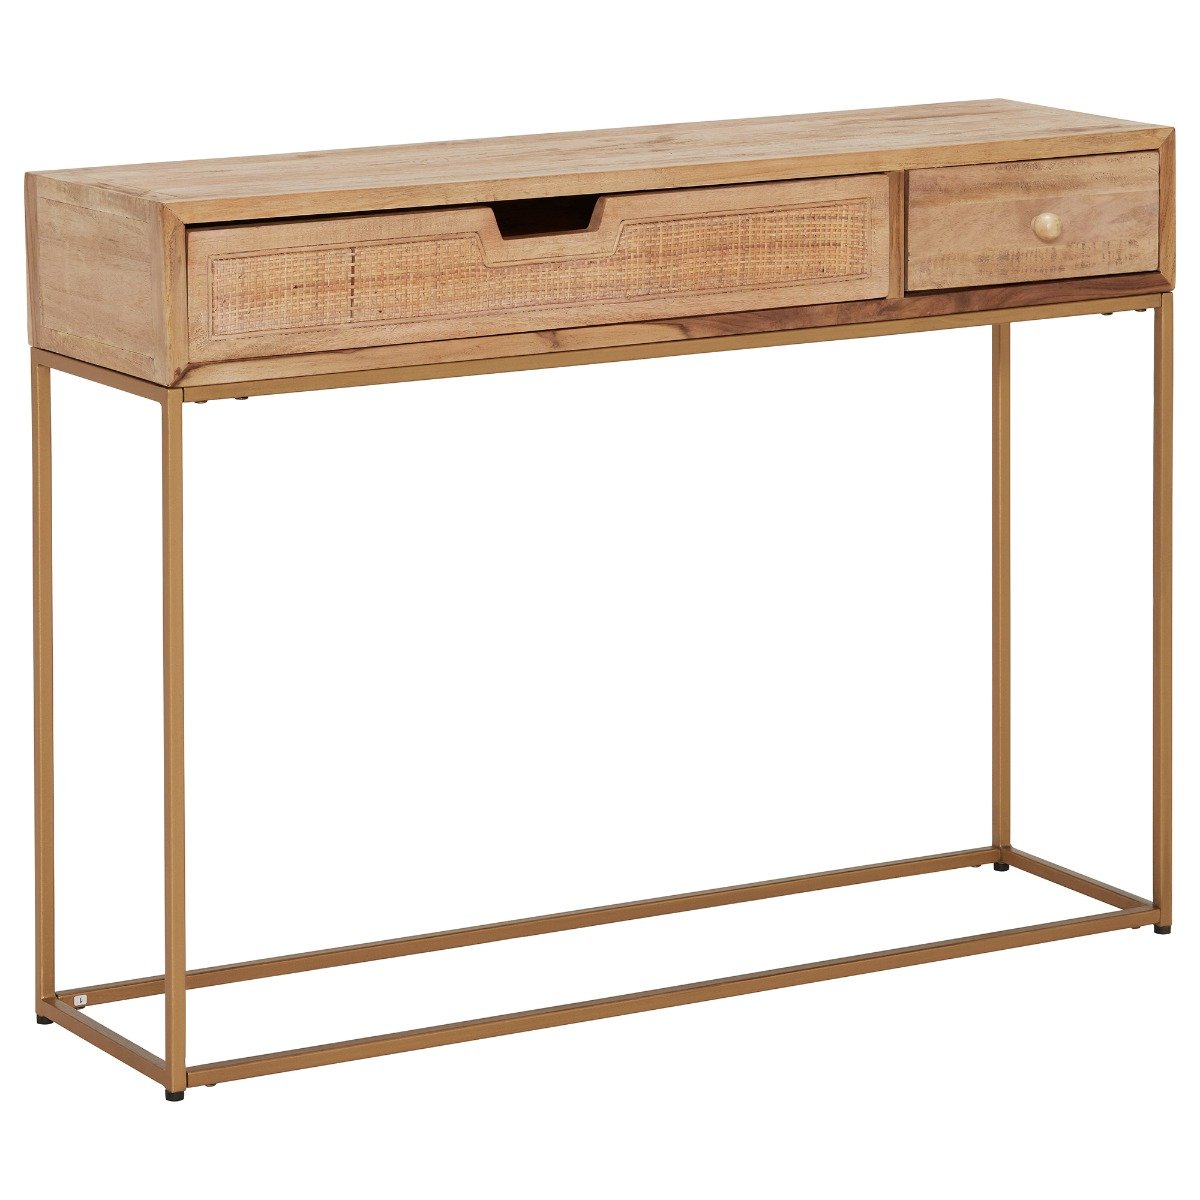 Wren 2 Drawer Console Table, Neutral Wood | Barker & Stonehouse